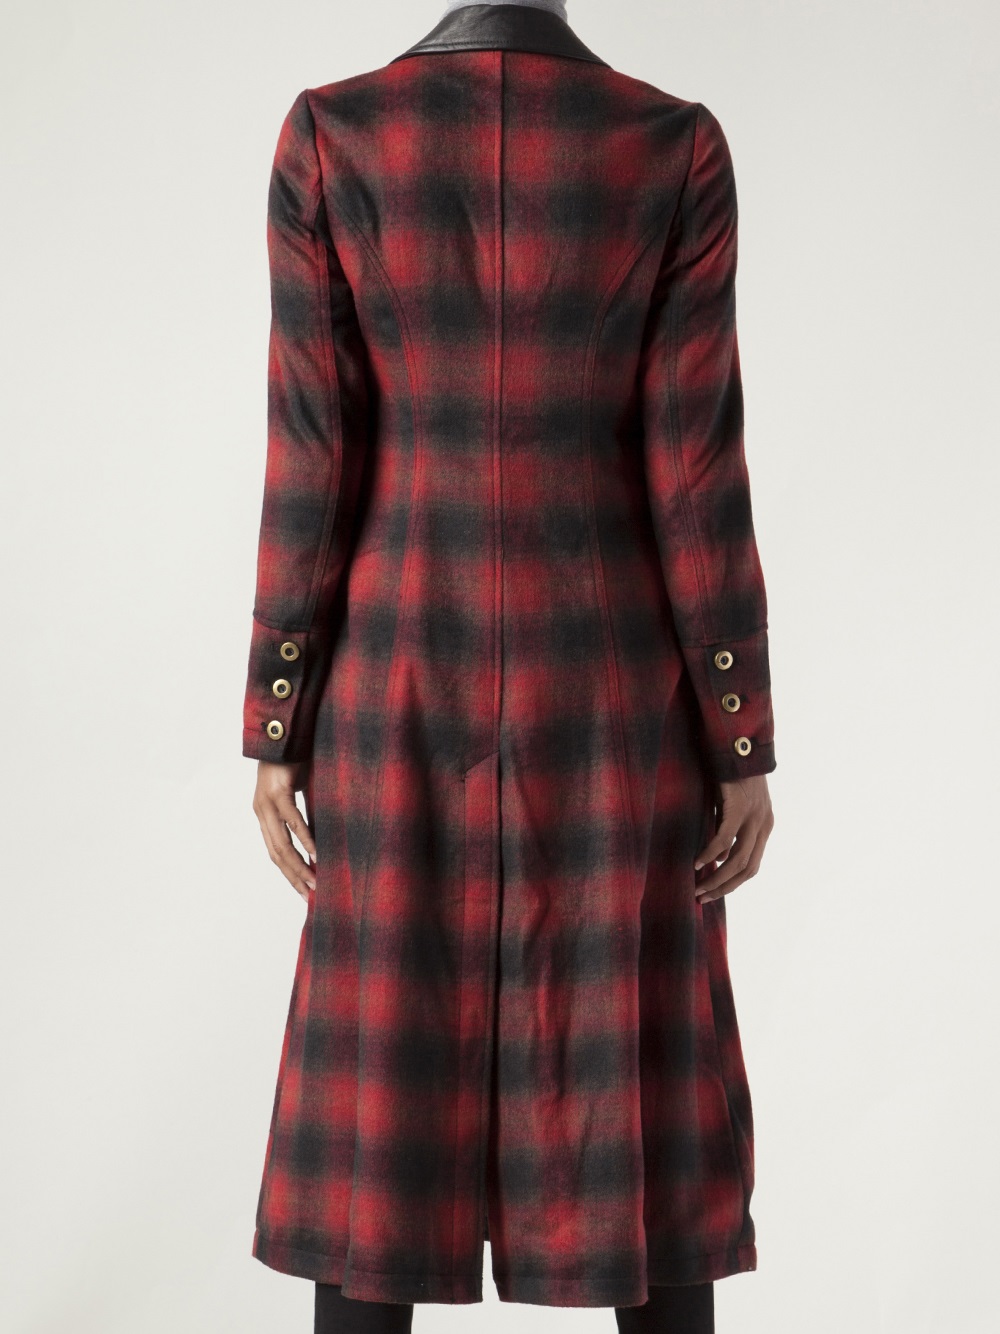 Lyst Free People Plaid Maxi Sergeant Coat in Red